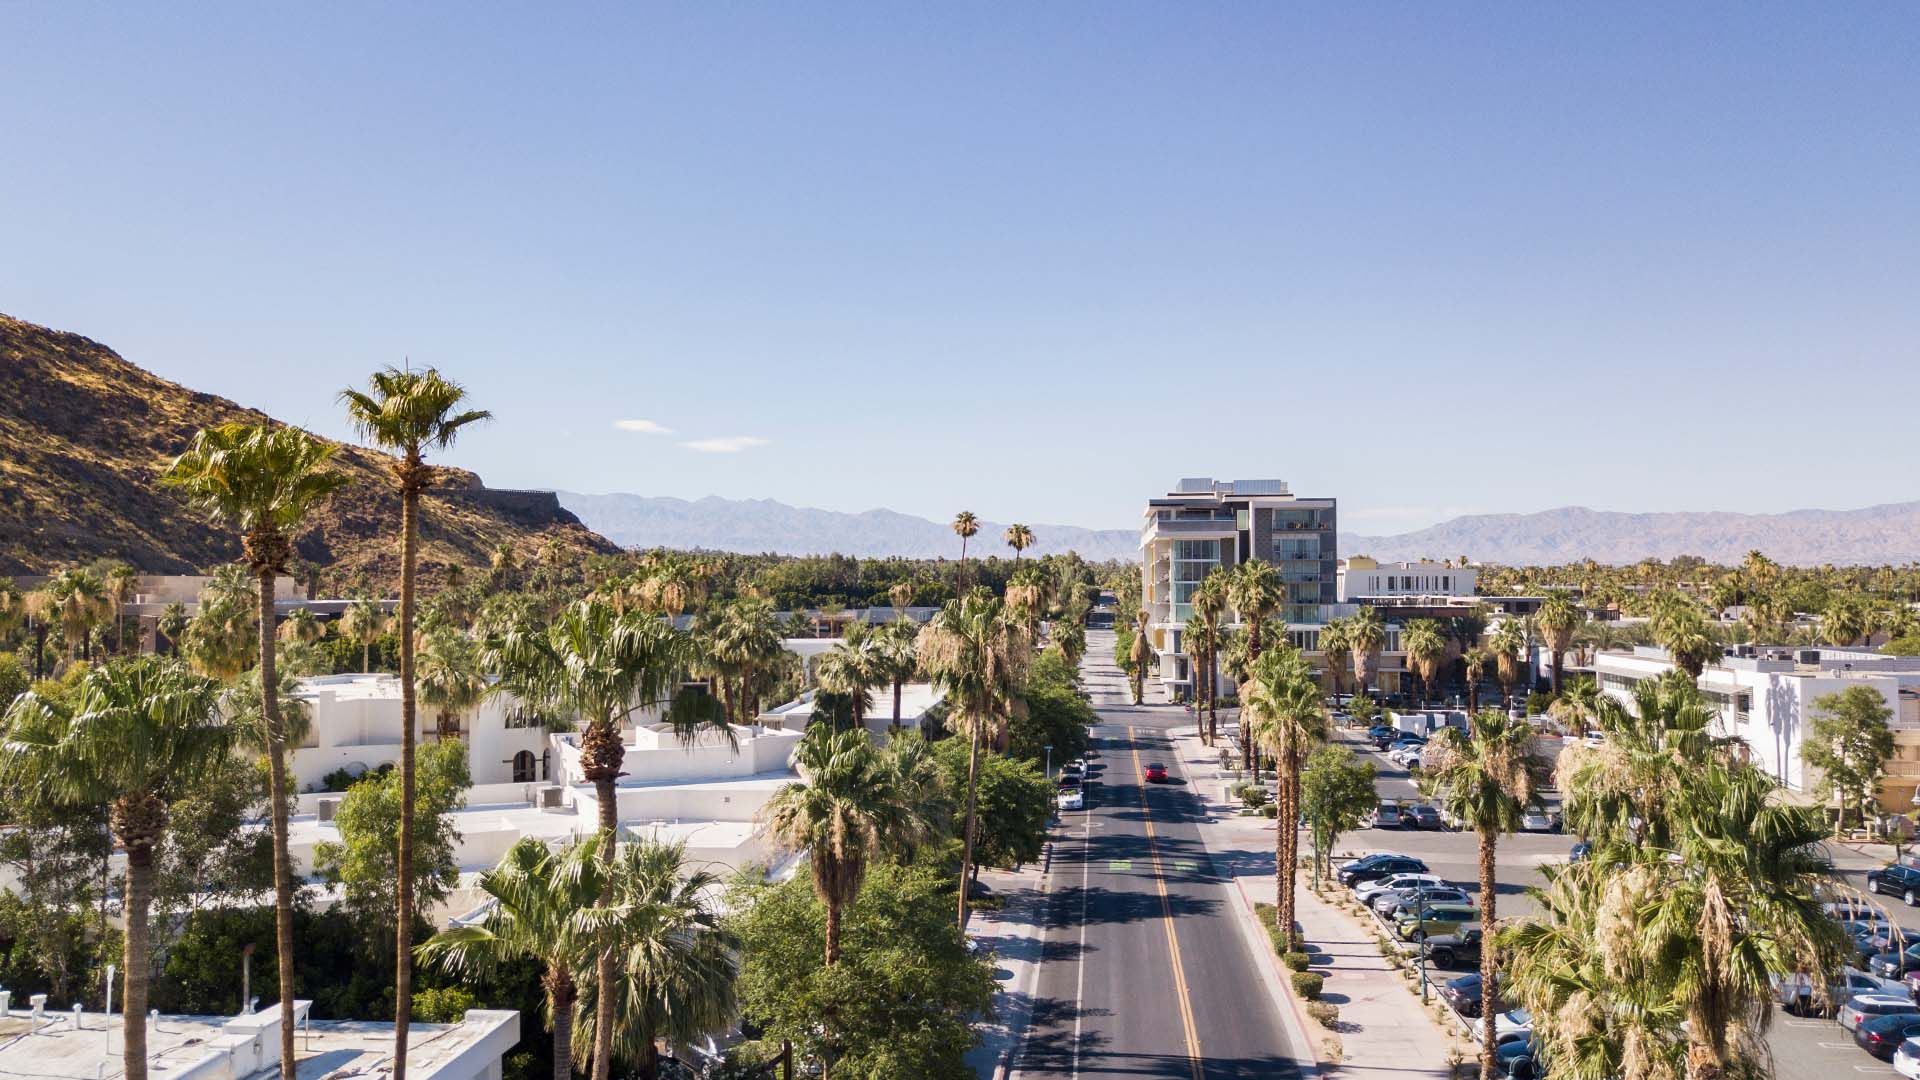 The Ultimate Travel Guide to Palm Springs and the Desert